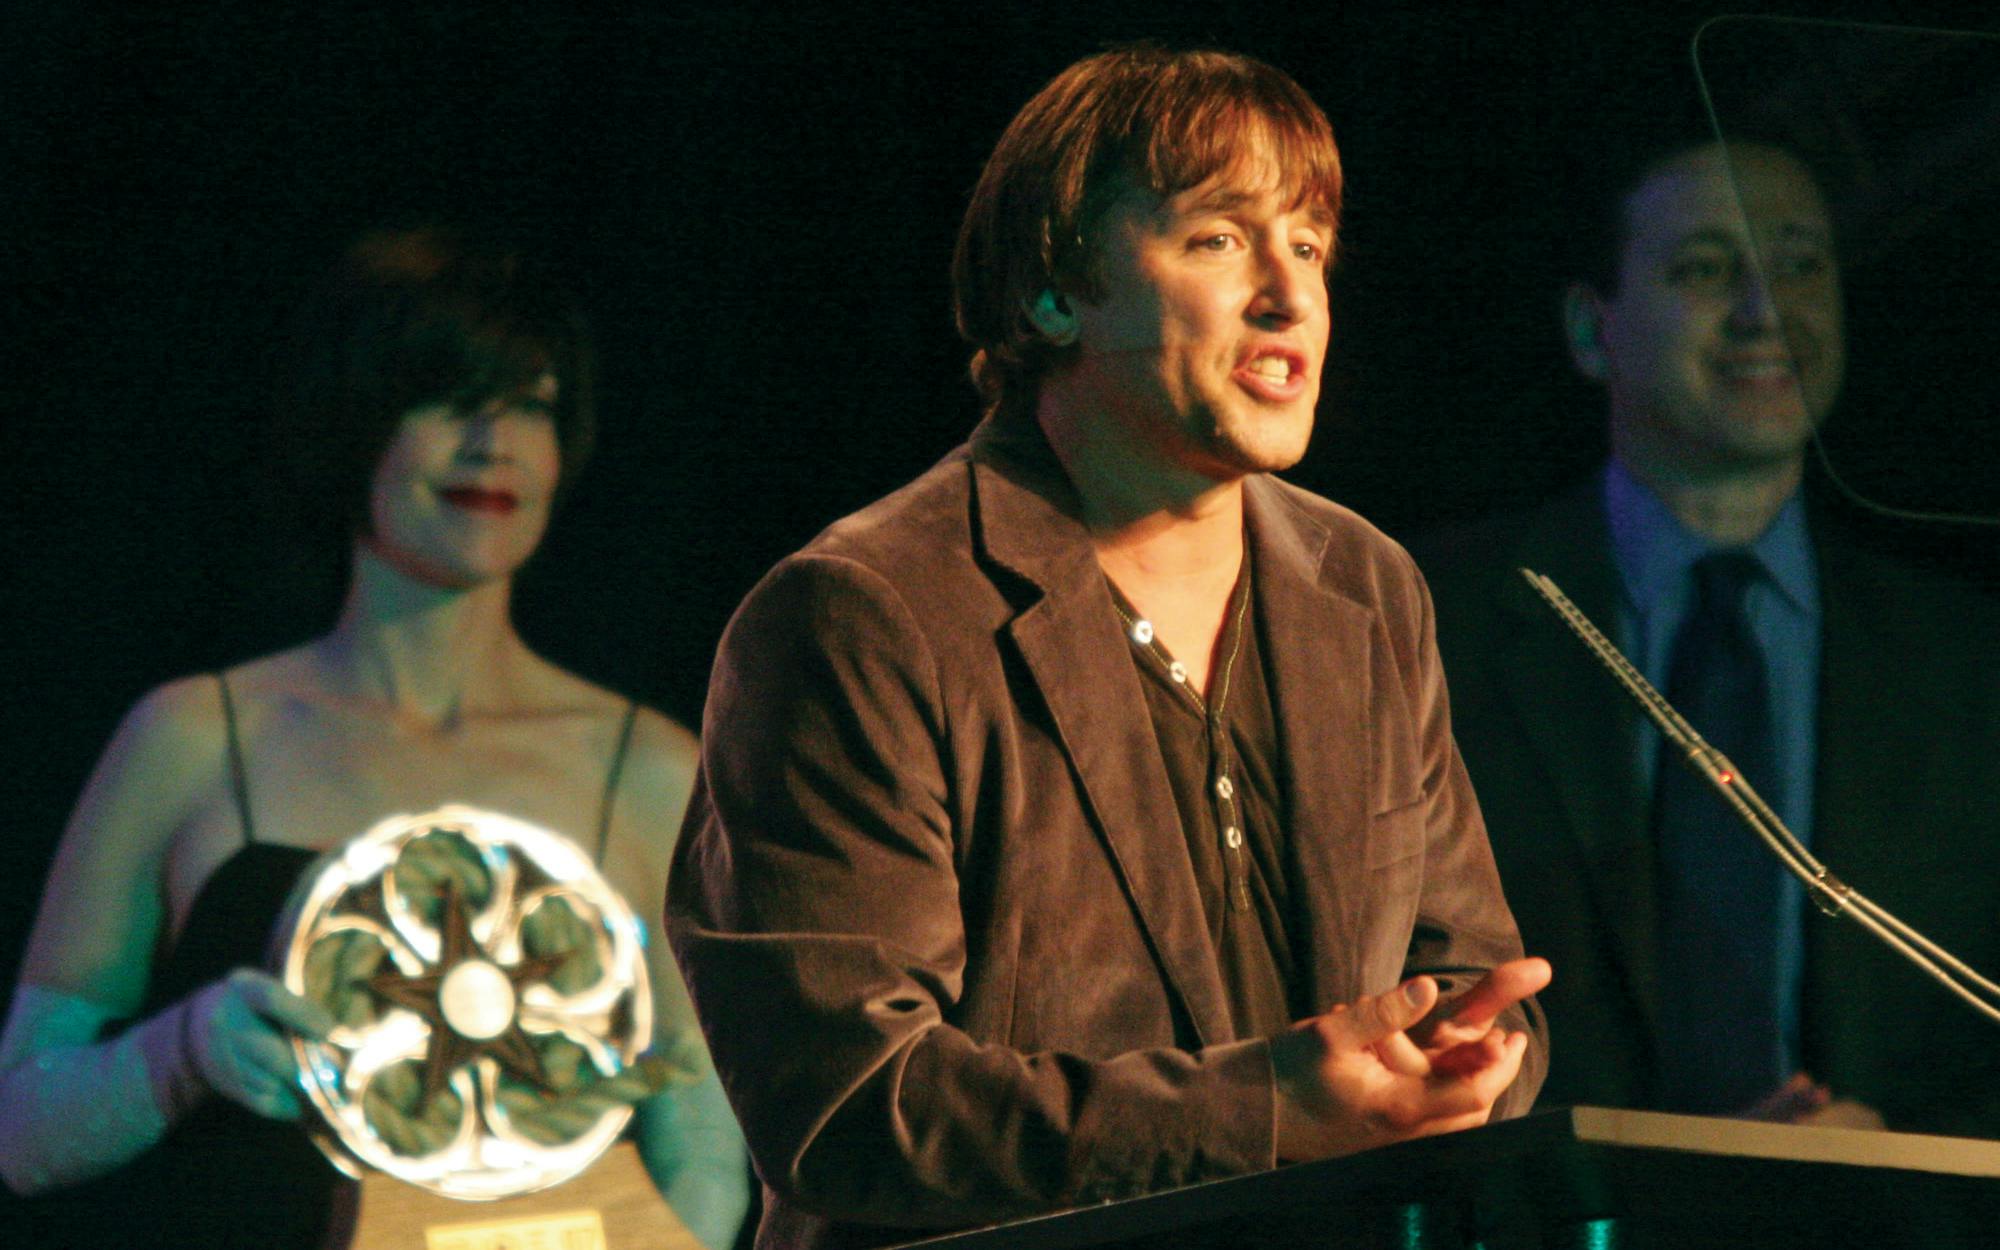 Richard Linklater at the Texas Film Hall of Fame